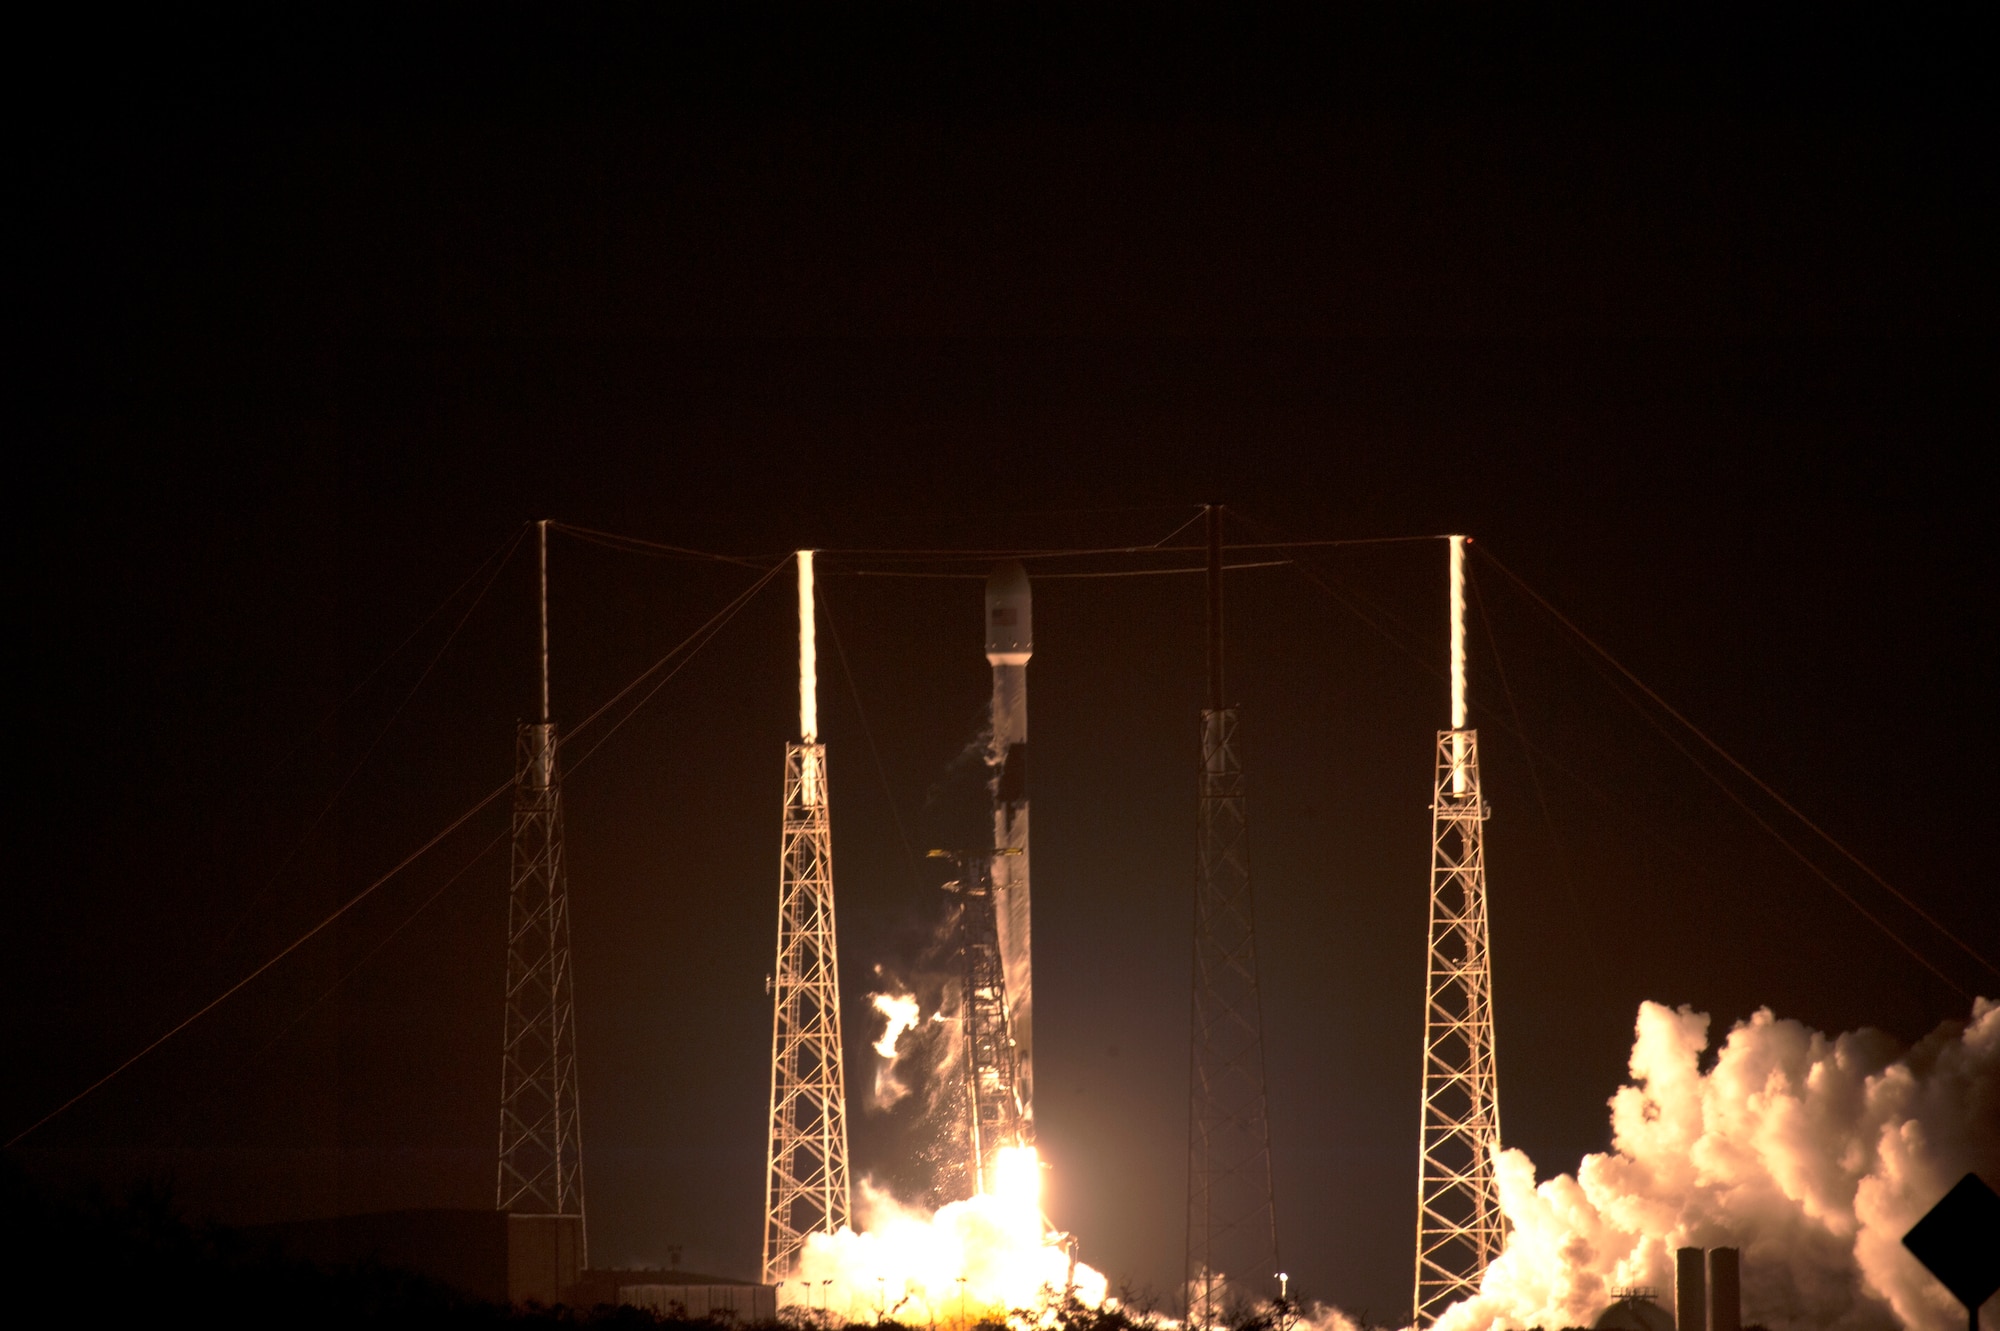 A SpaceX Falcon 9 rocket launches Starlink at Cape Canaveral Air Force Station, Fla. on May 23, 2019. The Starlink mission put 60 satellites into orbit and aims to build a constellations of satellites to bring internet capabilities to areas that do not have or have limited internet. (U.S. Air Force photo by Maggie Nave)